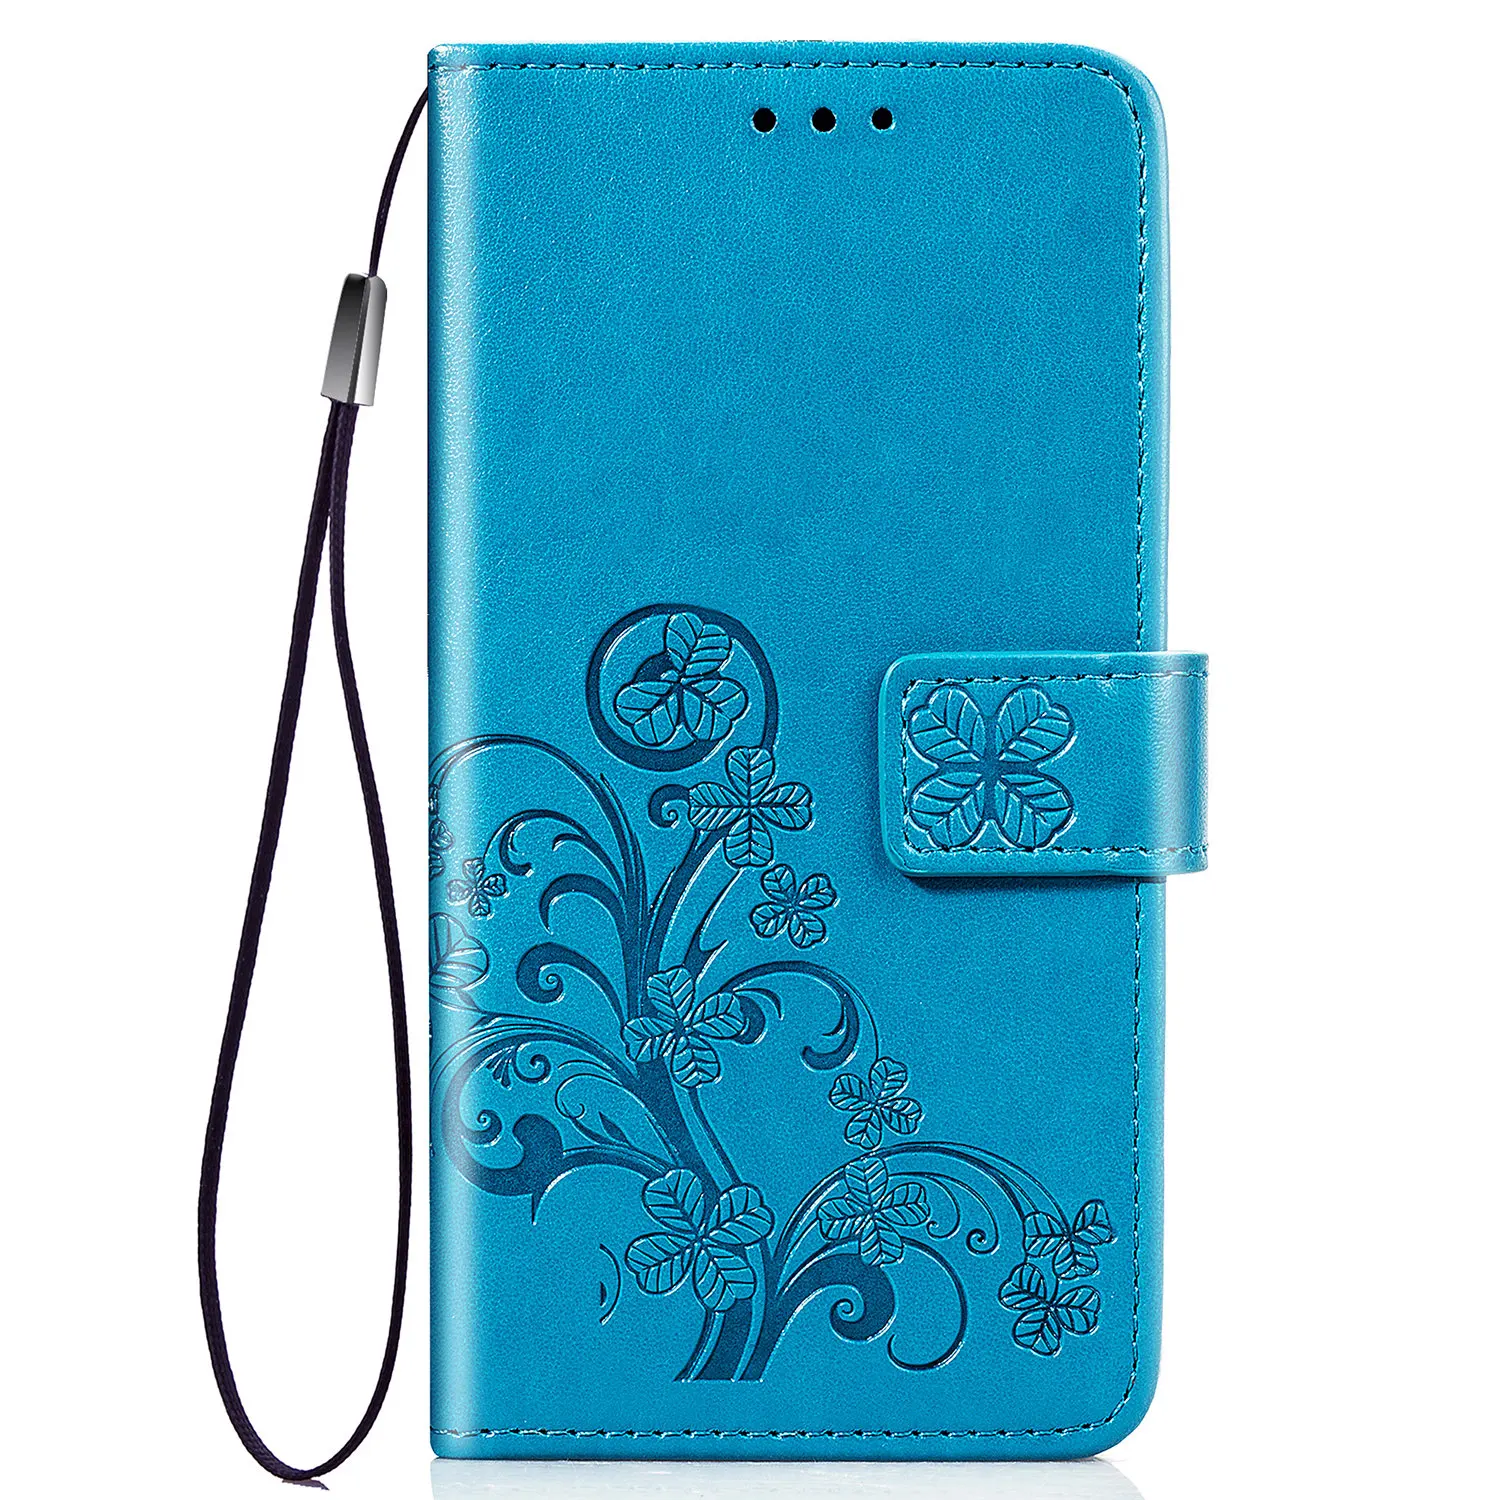 Luxury Flip Leather Phone Wallet Card Slots Cases Cover for Samsung Galaxy J5 2017 J530F J5 Pro Eurasia Edition